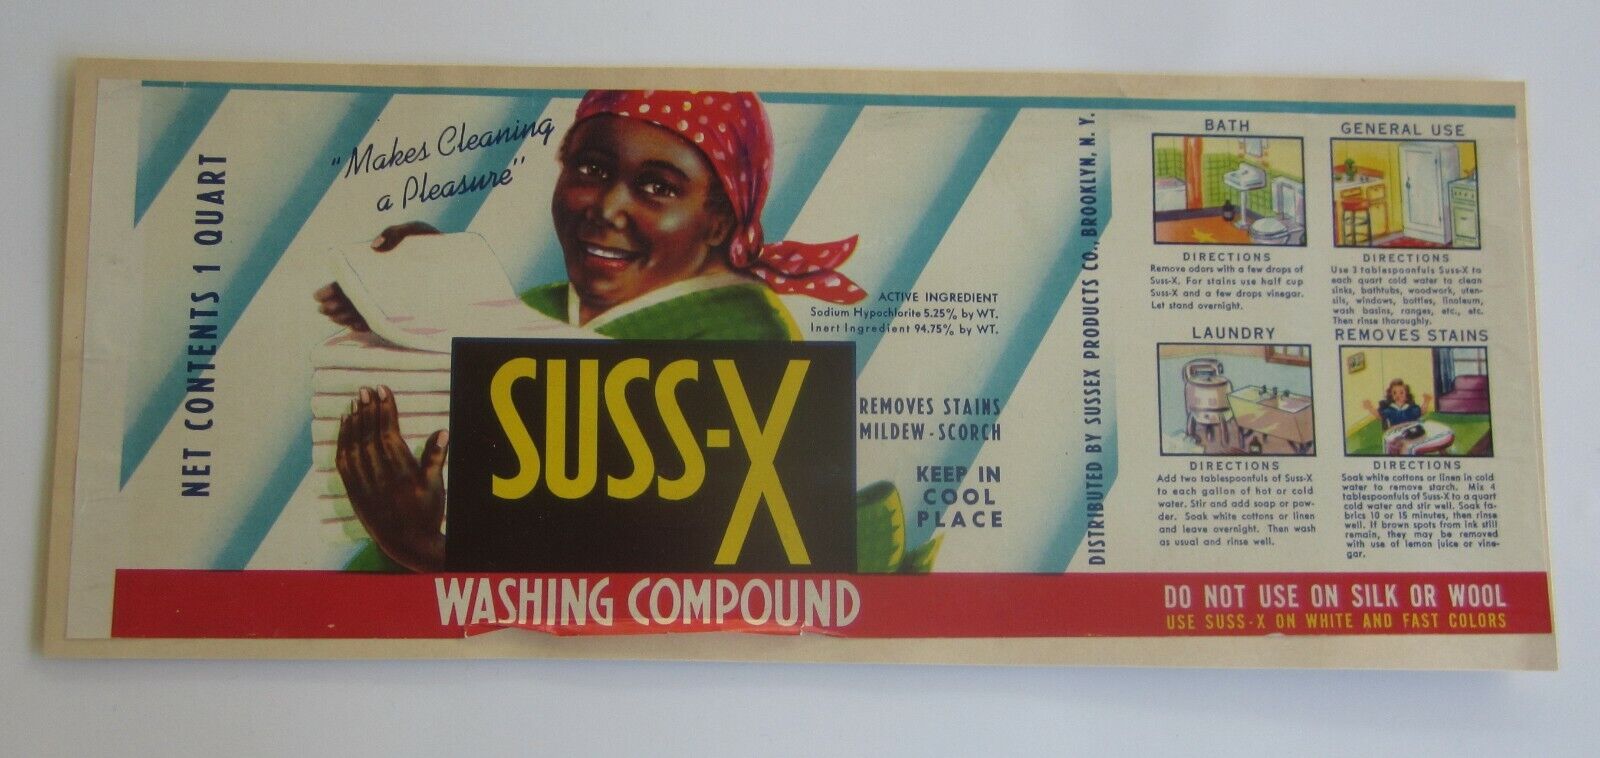 Old Vintage 1940's - SUSS-X - Cleaning Product - LABEL - Brooklyn N.Y.  - SAMPLE